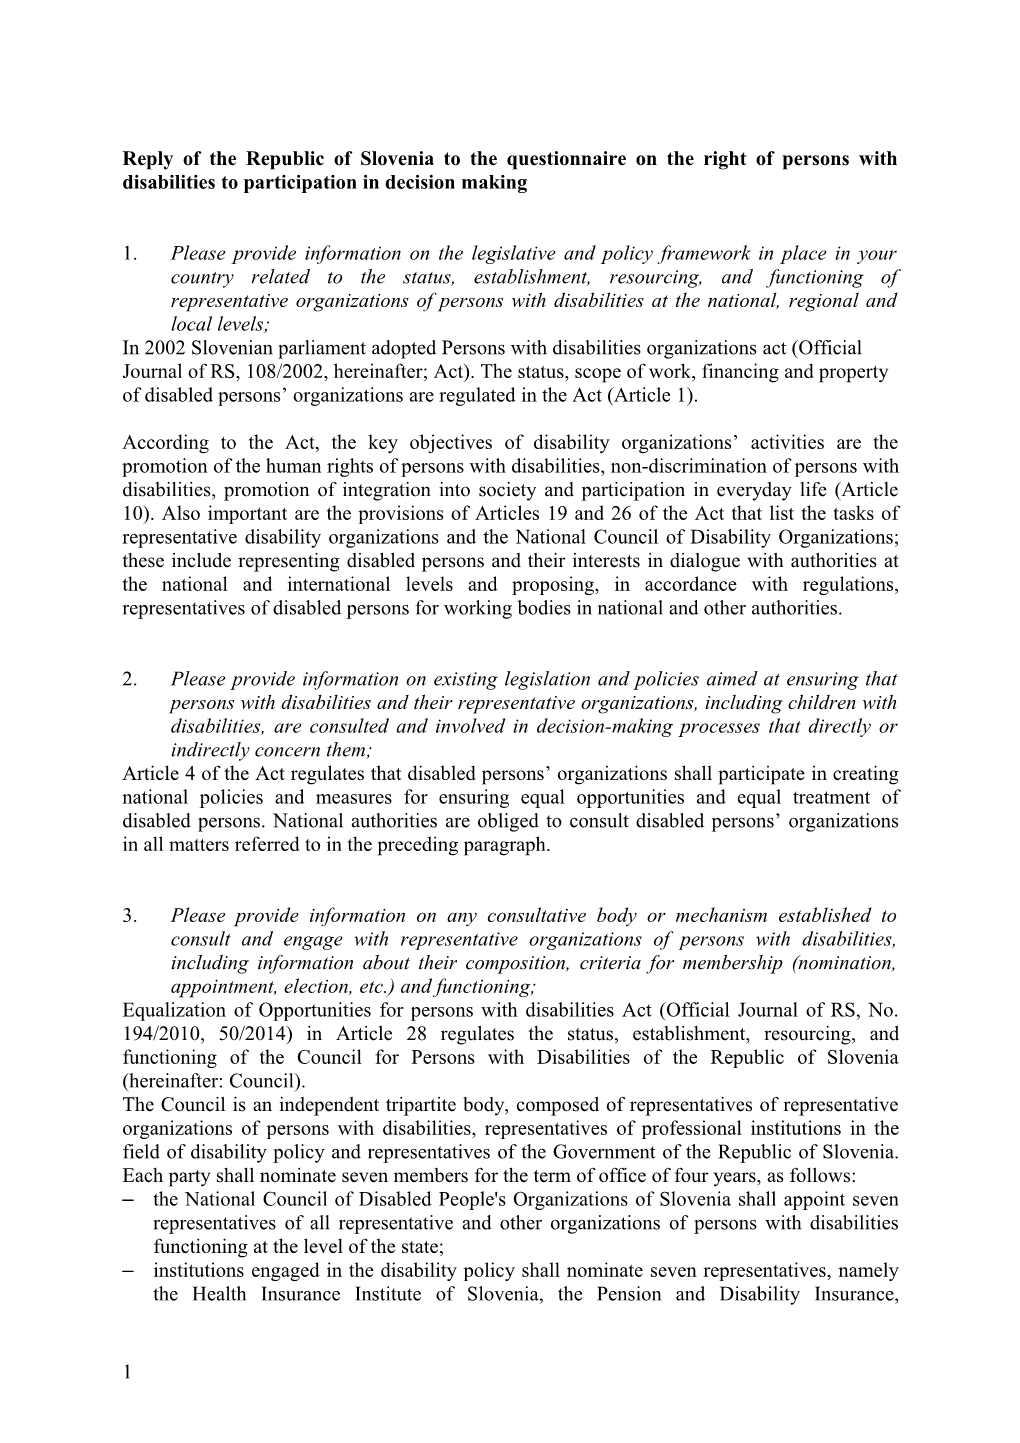 Reply of the Republic of Slovenia to the Questionnaire on the Right of Persons With